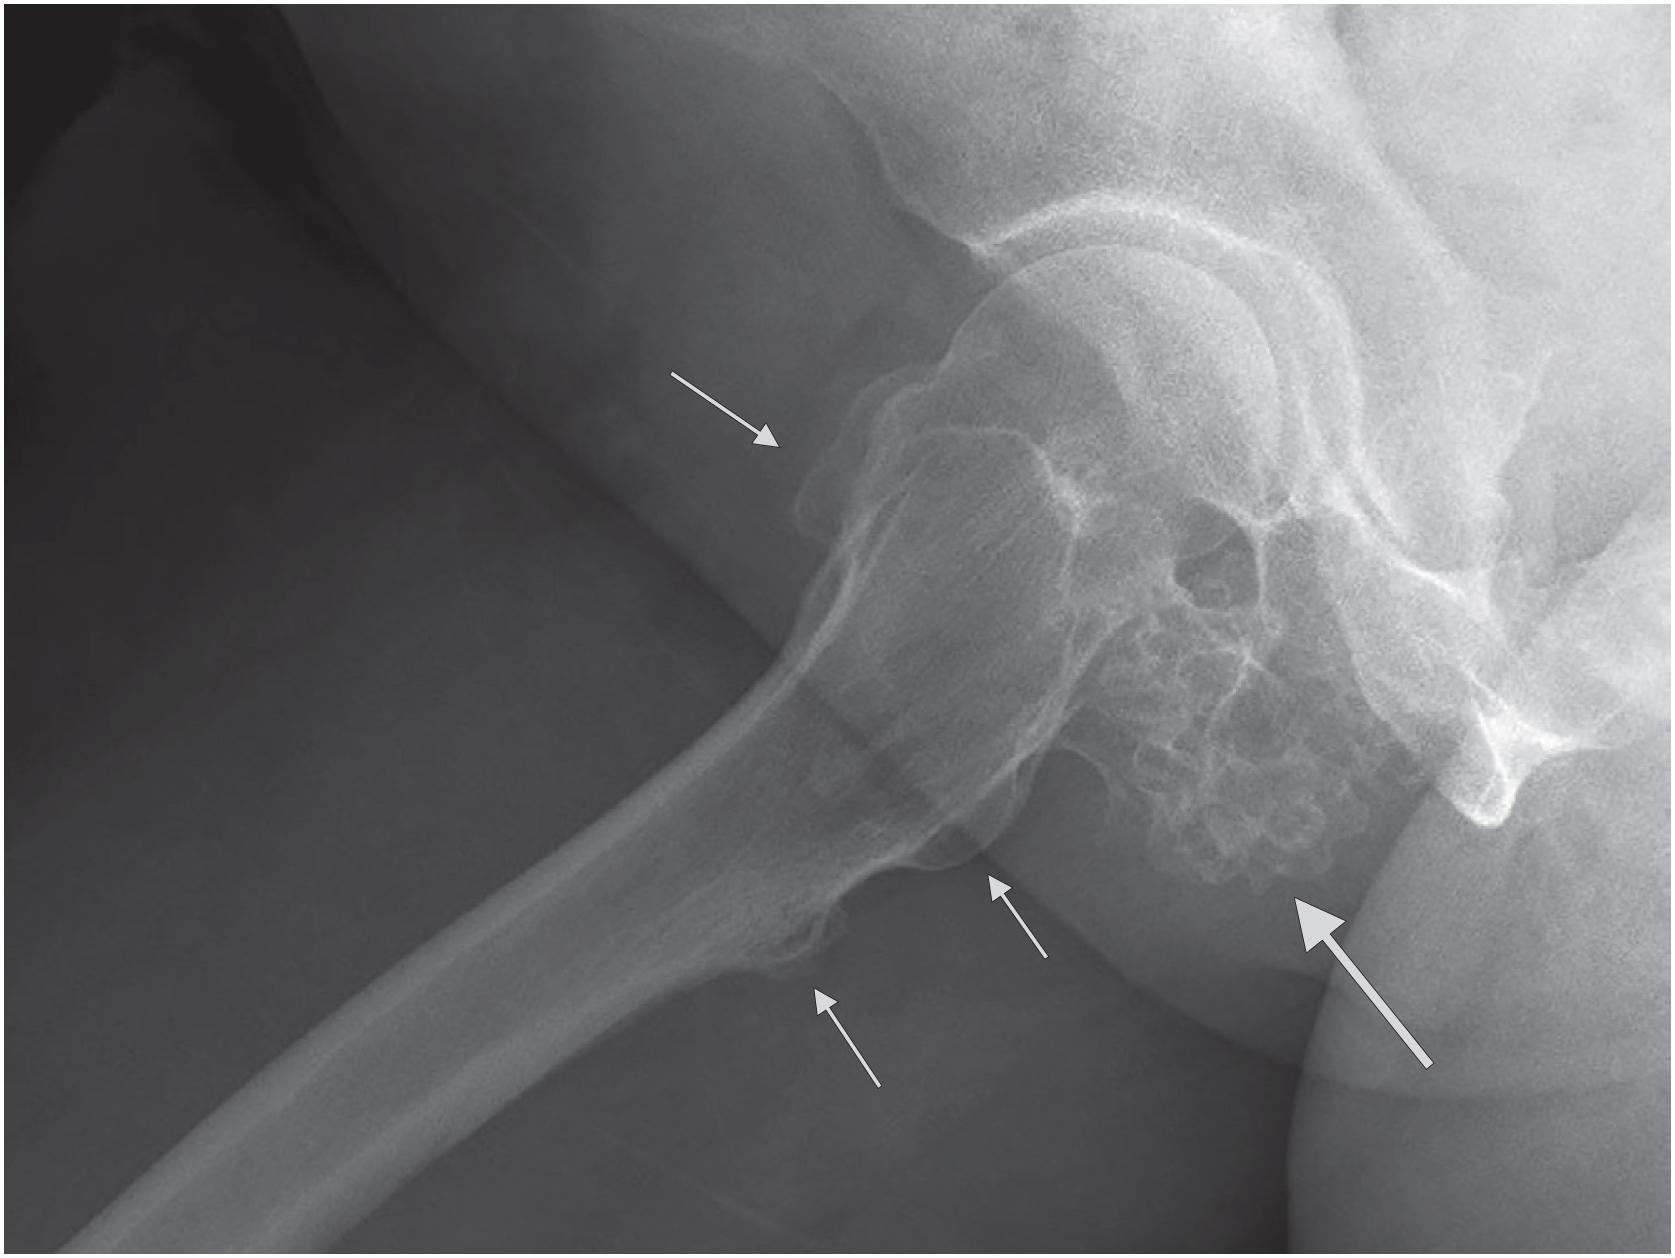 Fig. 17.6, A pedunculated osteochondroma involving the right femoral neck ( large arrow ). Several smaller osteochondromas are visible throughout the surface of the proximal femur ( small arrows ), and each lesion shows cortico-medullary continuity with the underlying bone.